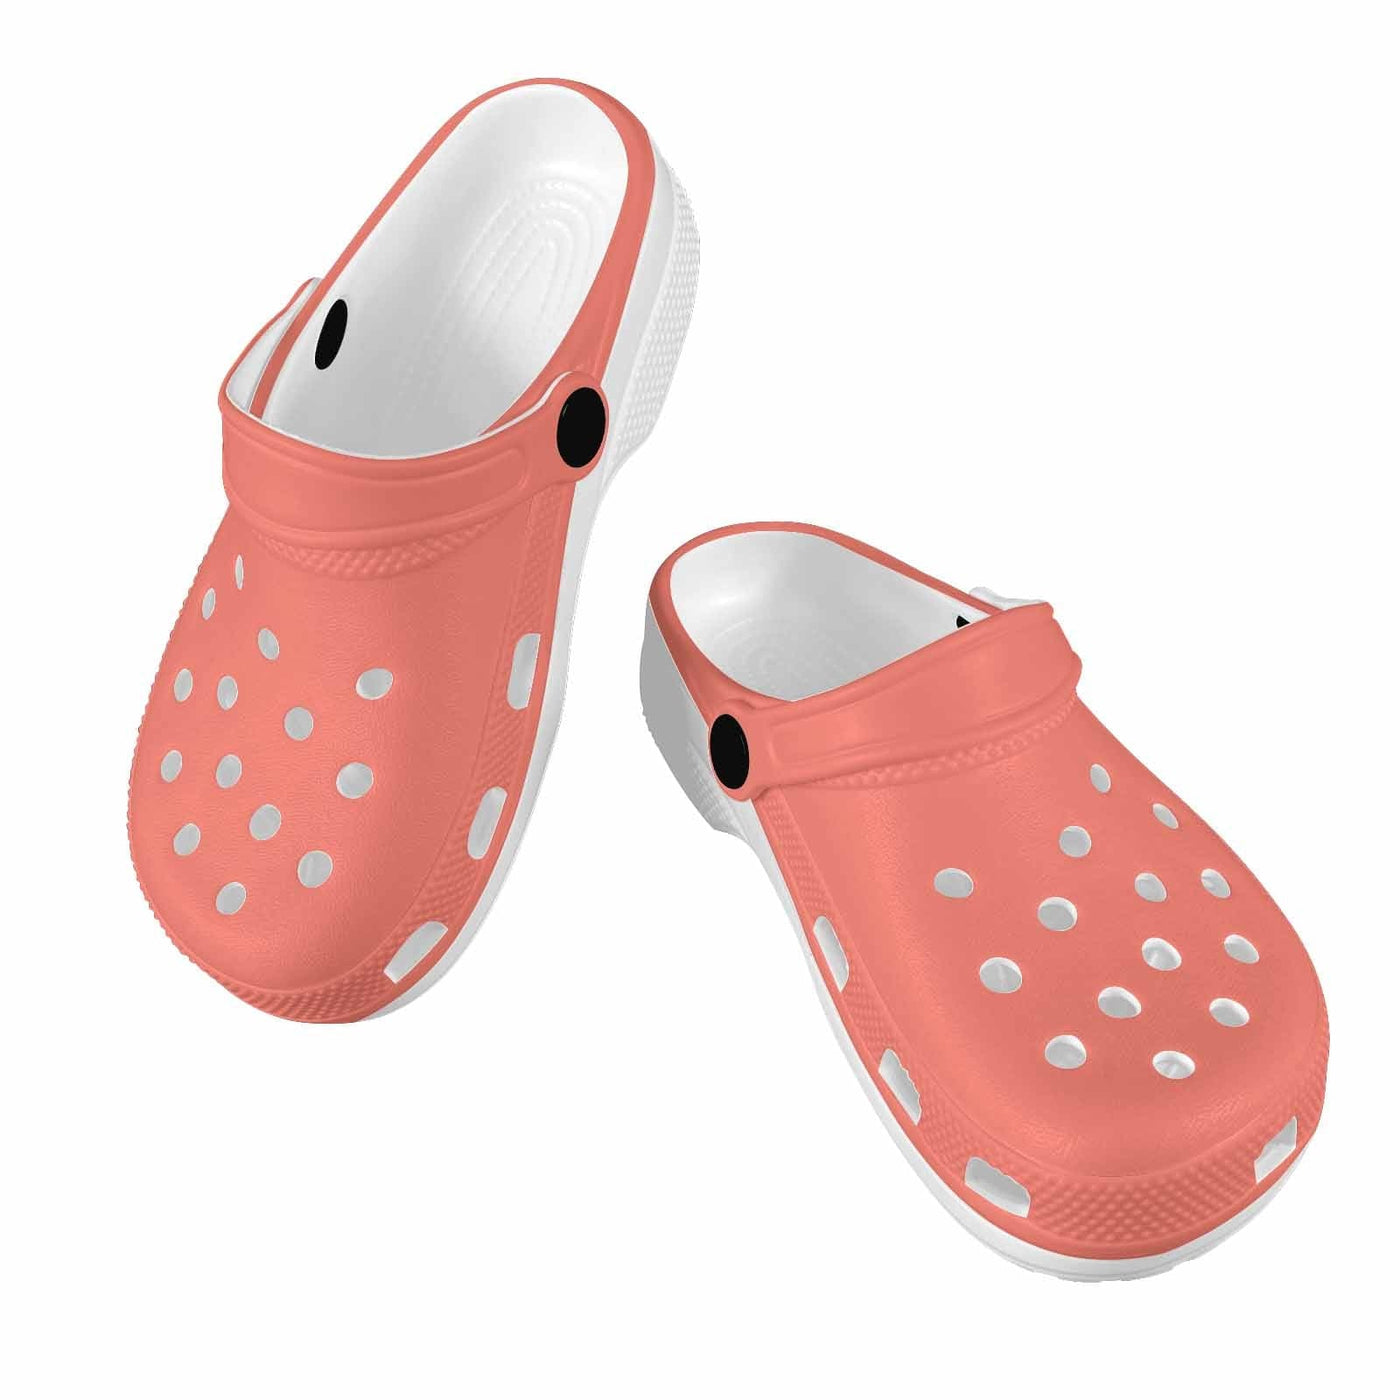 Salmon Red Kids Clogs - Unisex | Clogs | Youth